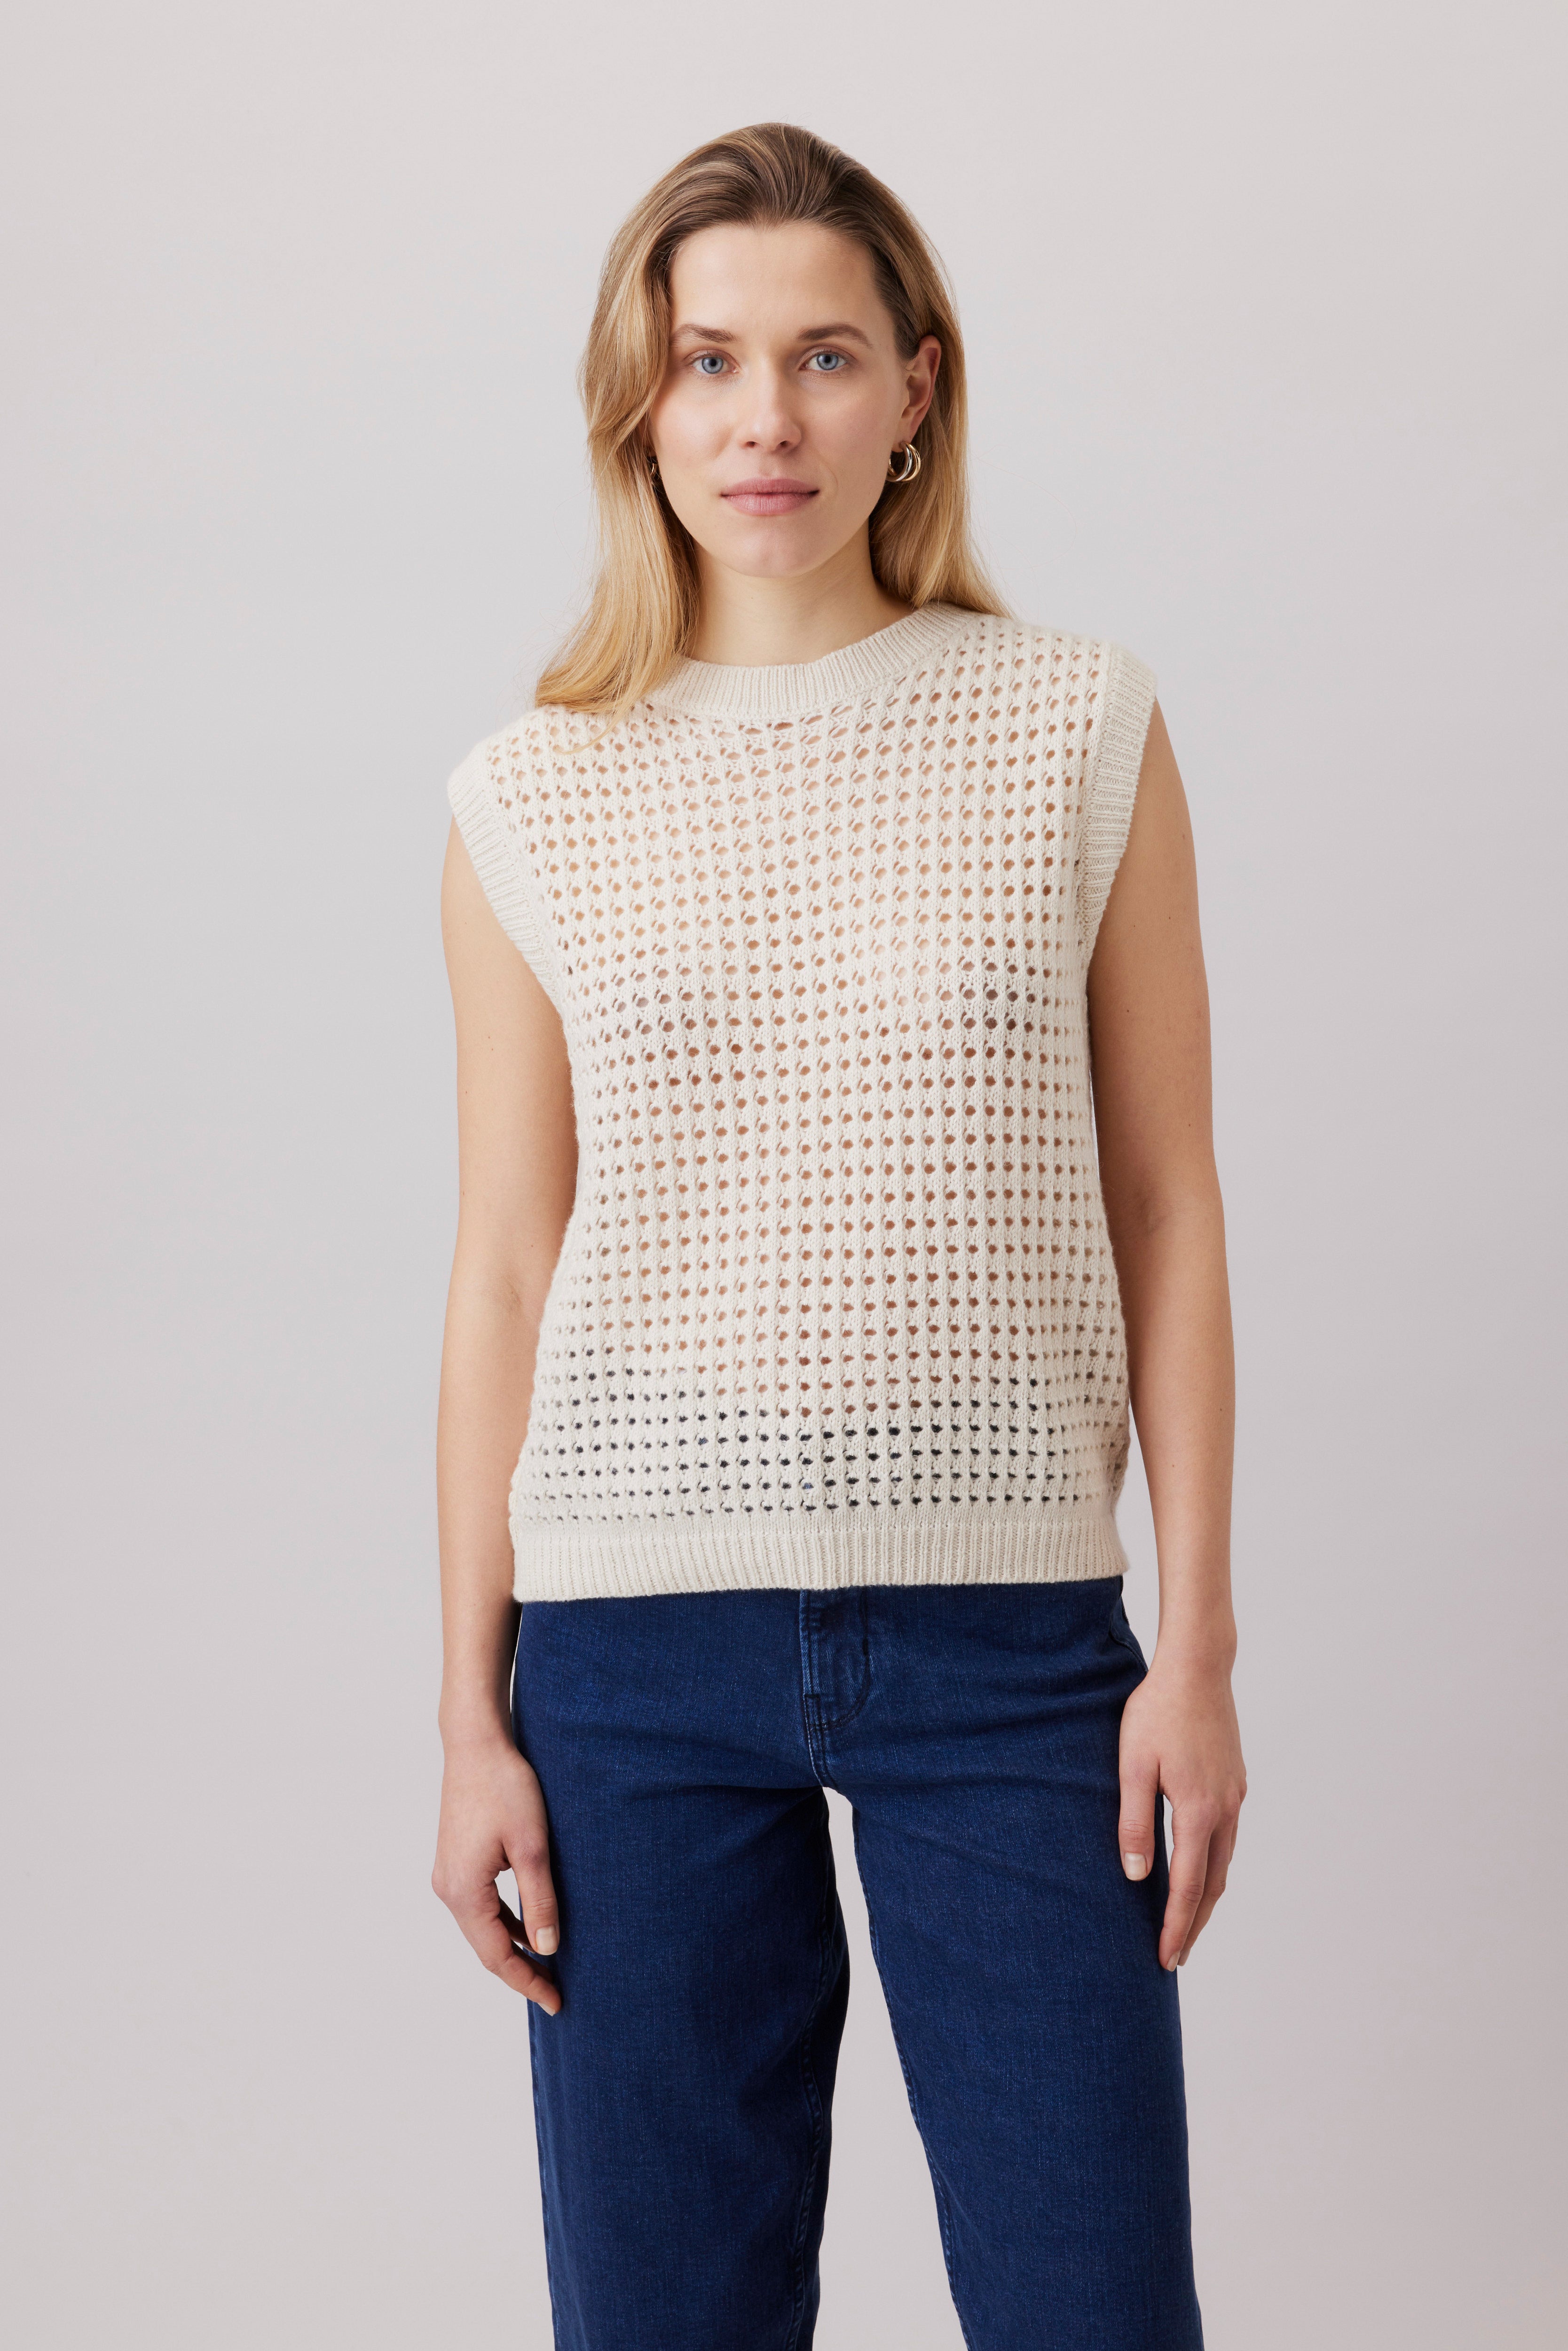 Crochet Sweater with Cashmere